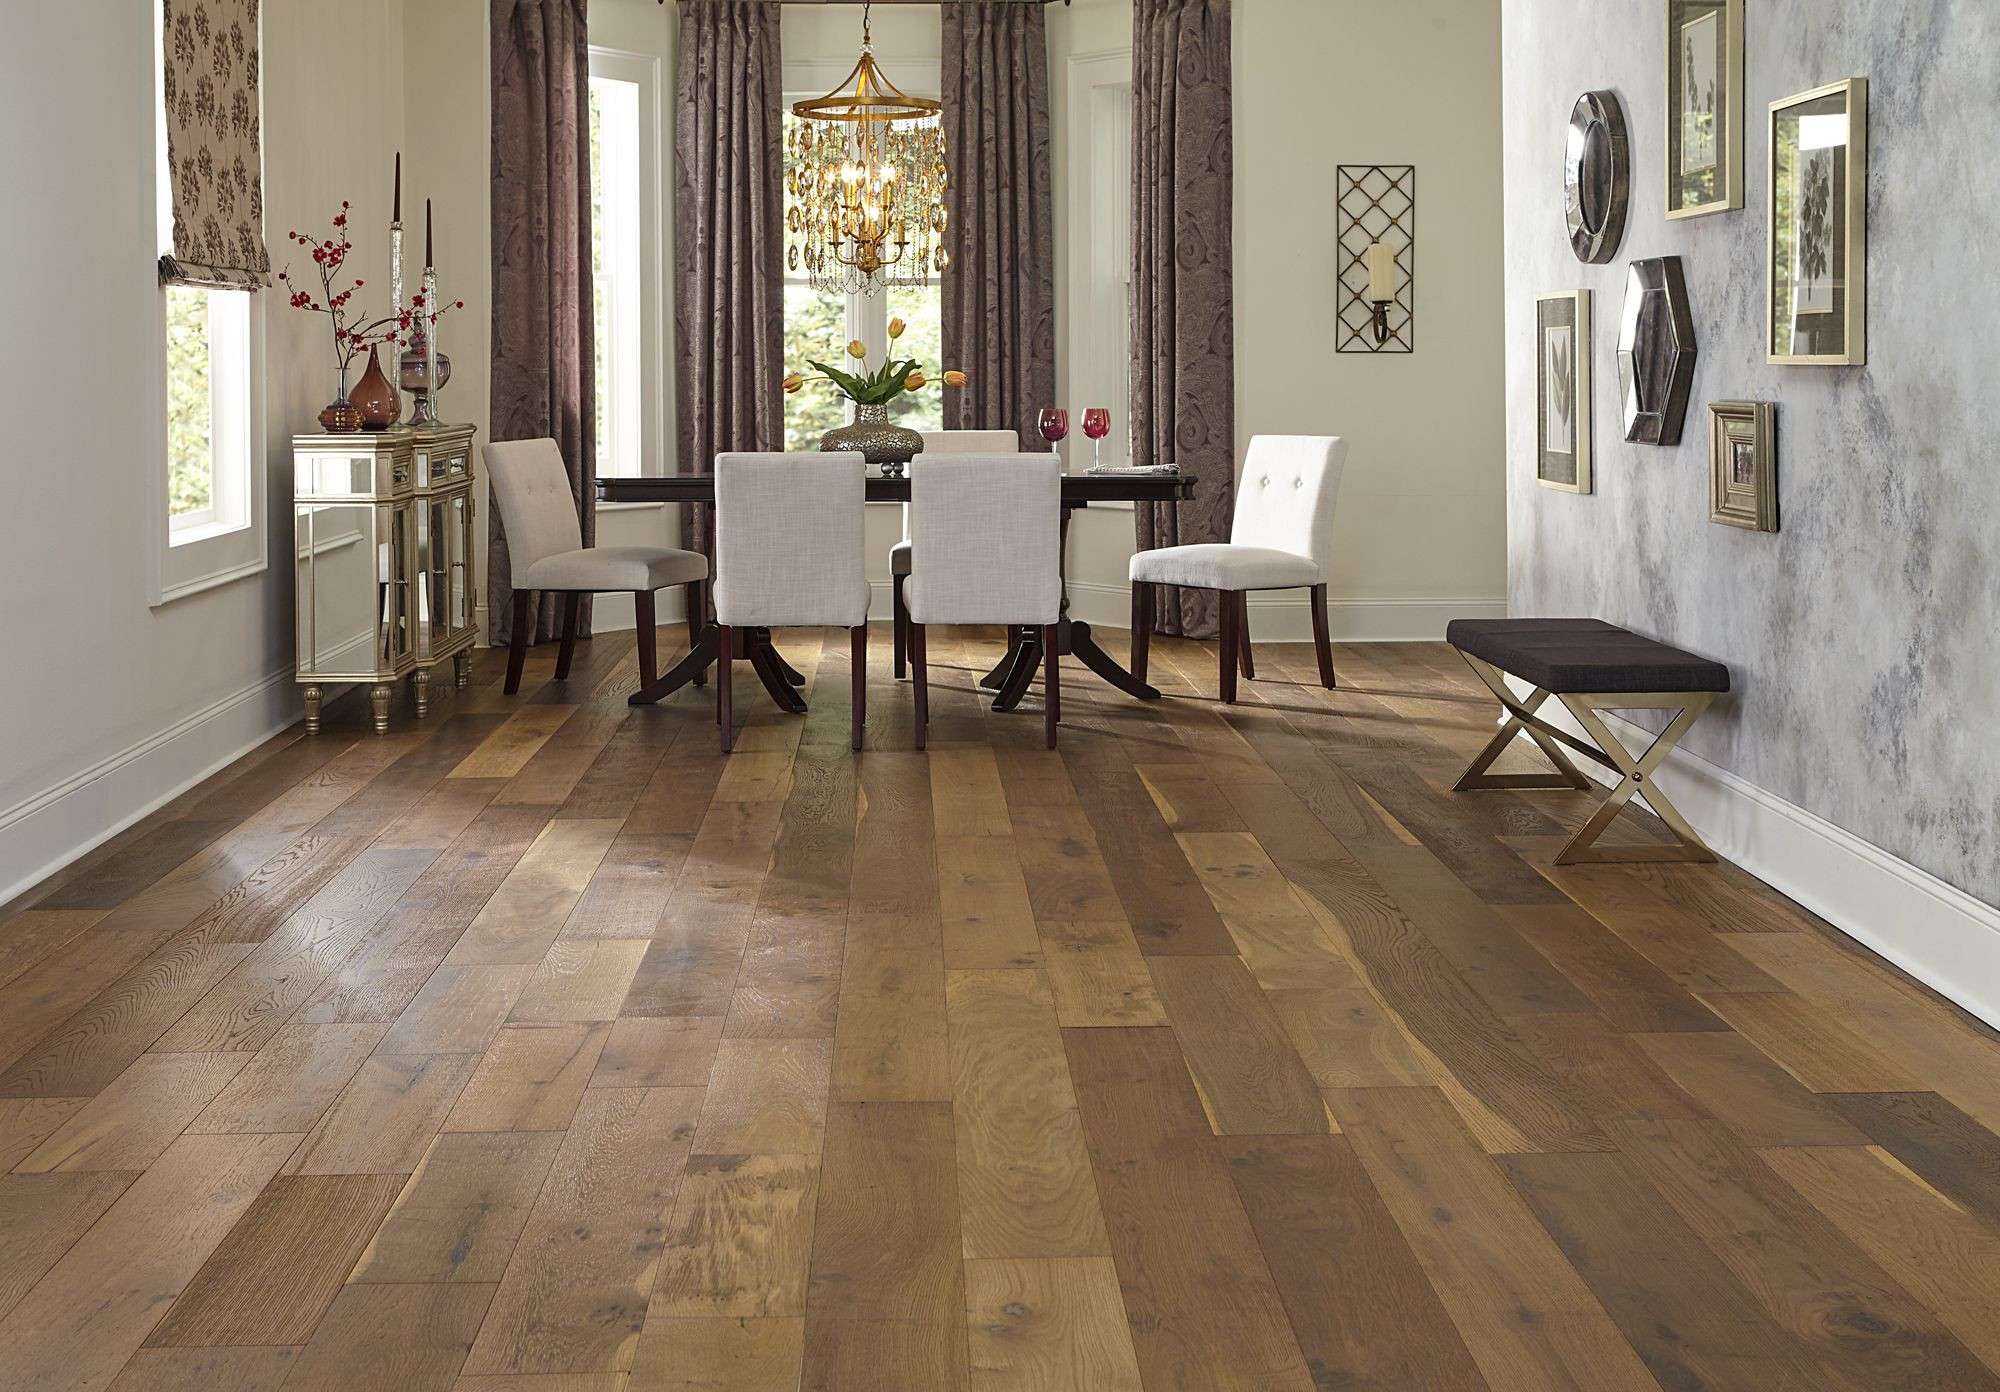 20 Stylish Hardwood Flooring In Ontario California 2024 free download hardwood flooring in ontario california of 7 1 2 wide planks and a rustic look bellawood willow manor oak has within 7 1 2 wide planks and a rustic look bellawood willow manor oak has a stor